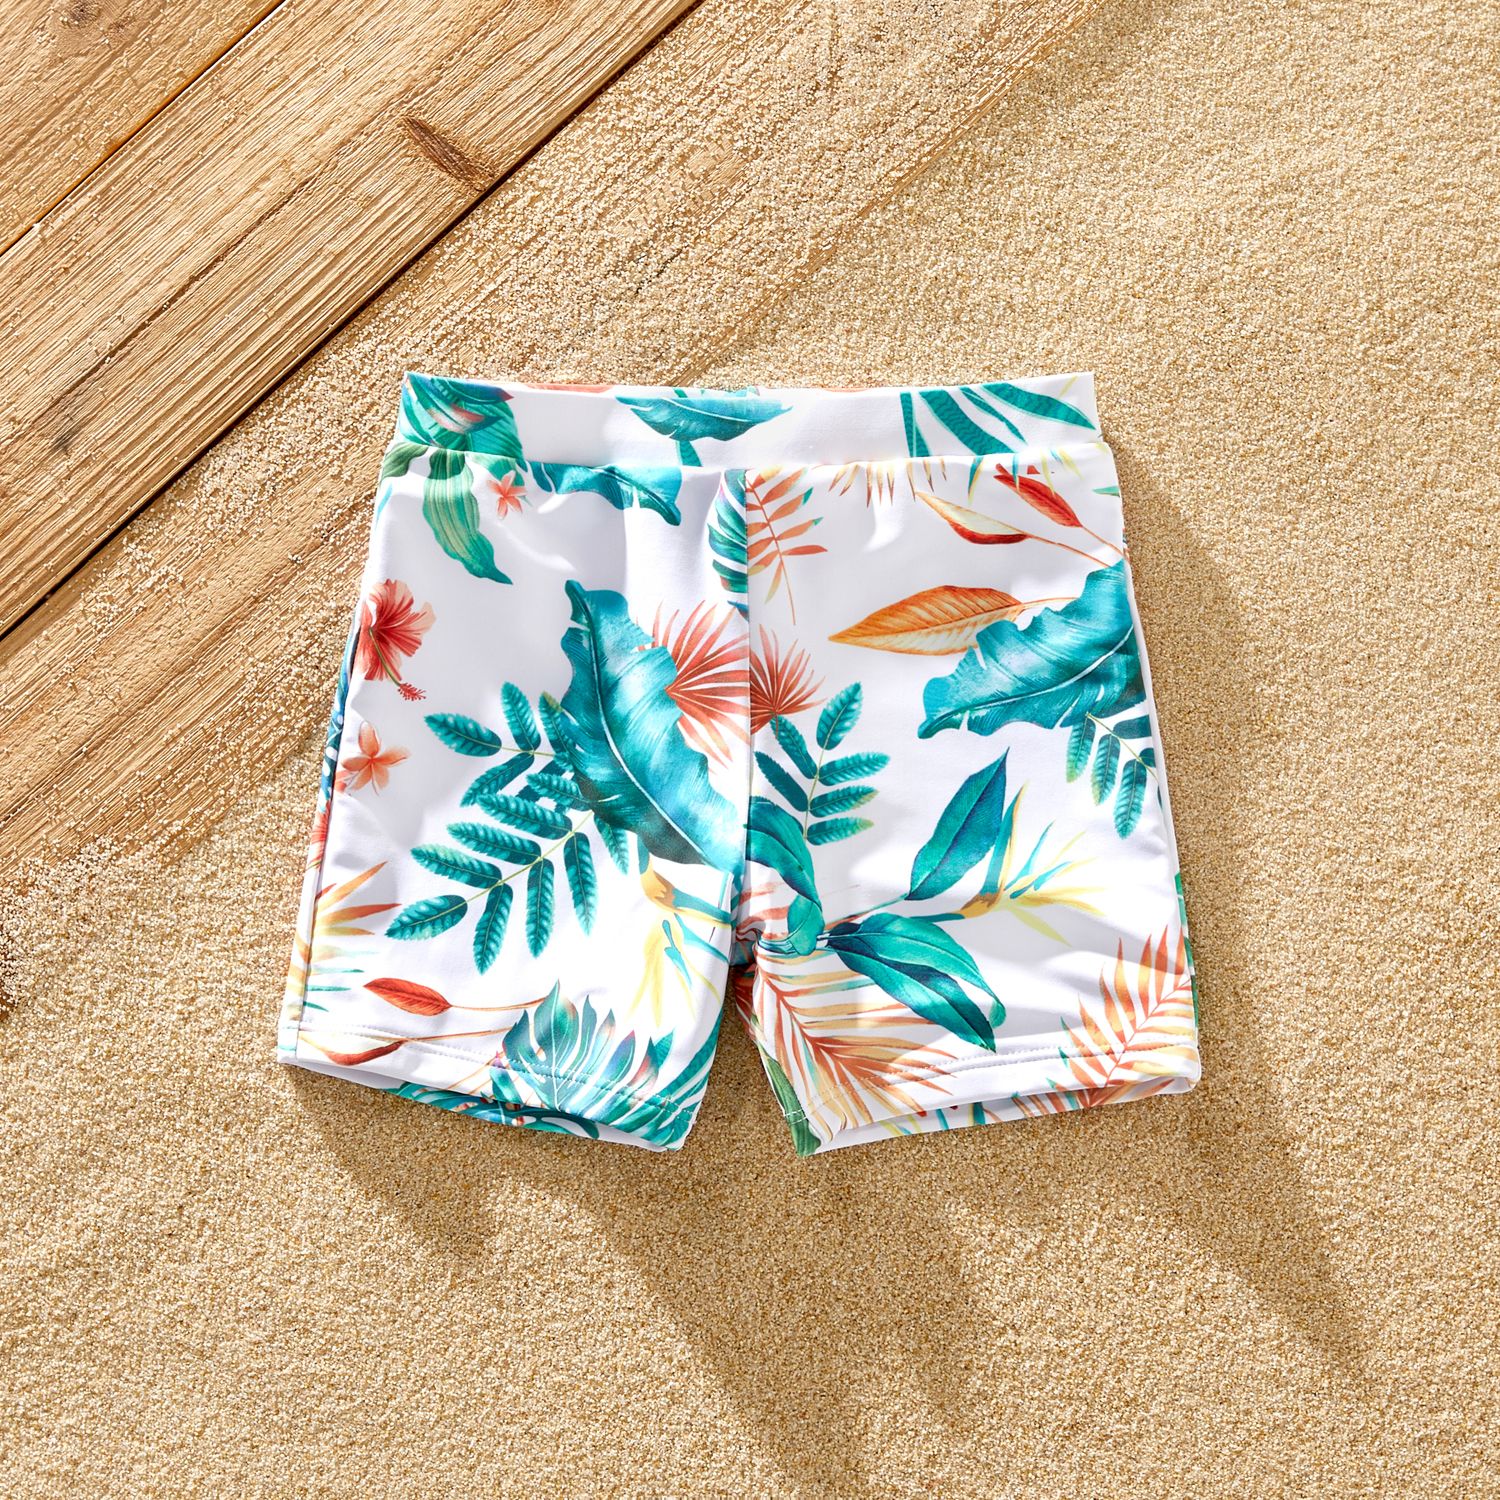 Family Matching Tropical Plant Print Ruffled Two-piece Swimsuit or Swim Trunks Shorts